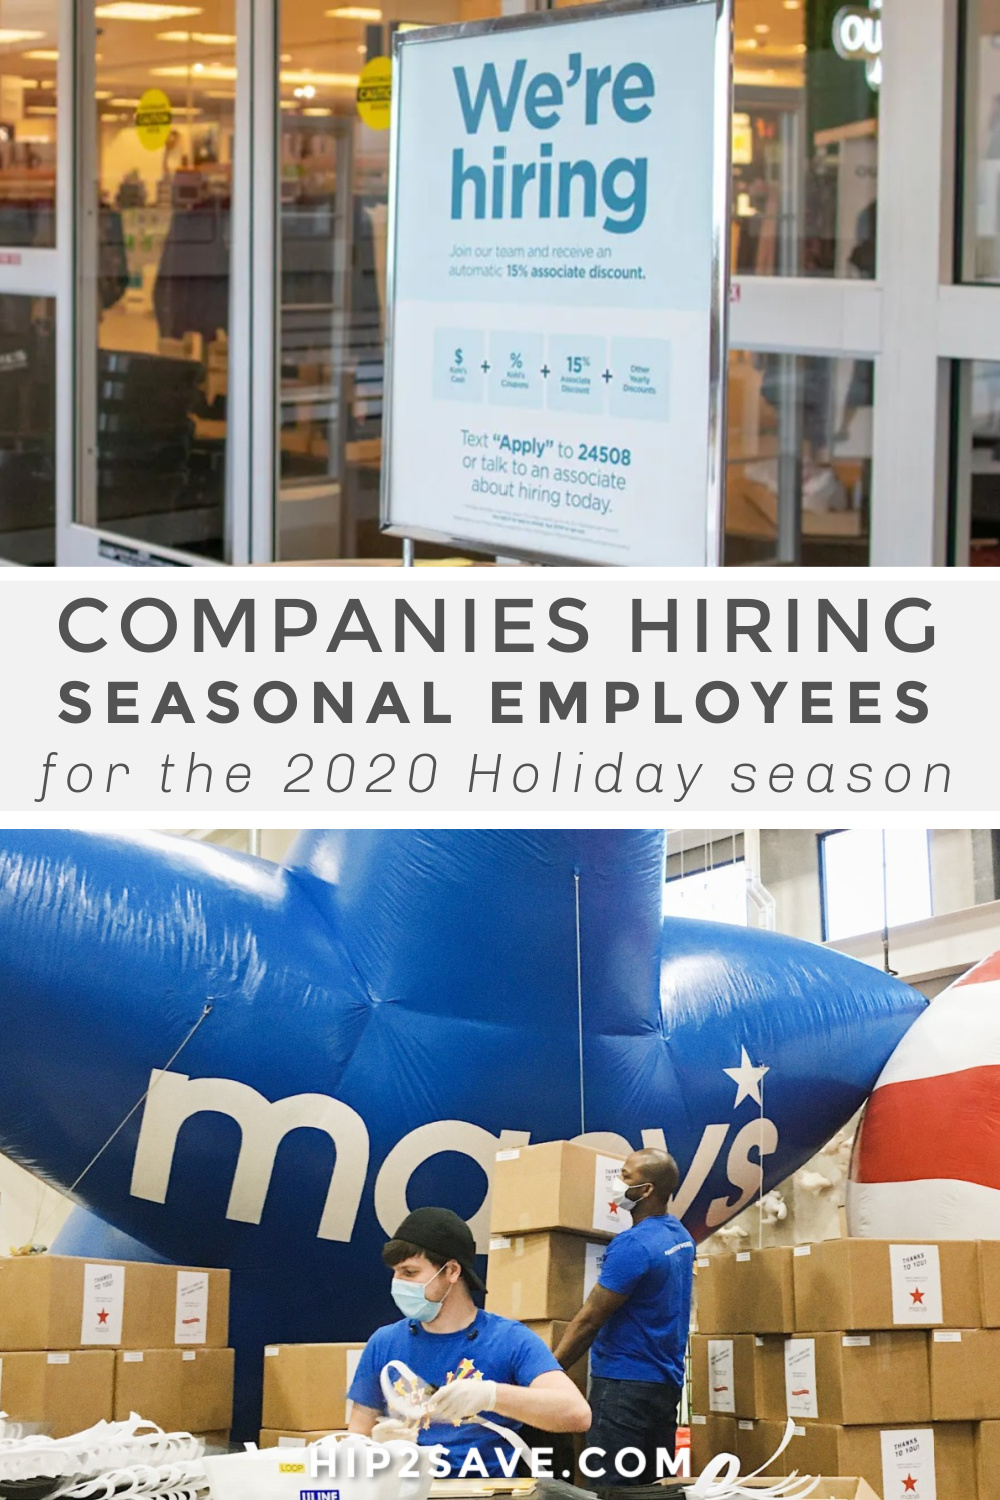 8 Top Seasonal Jobs in 2020 These Companies are Hiring Thousands!